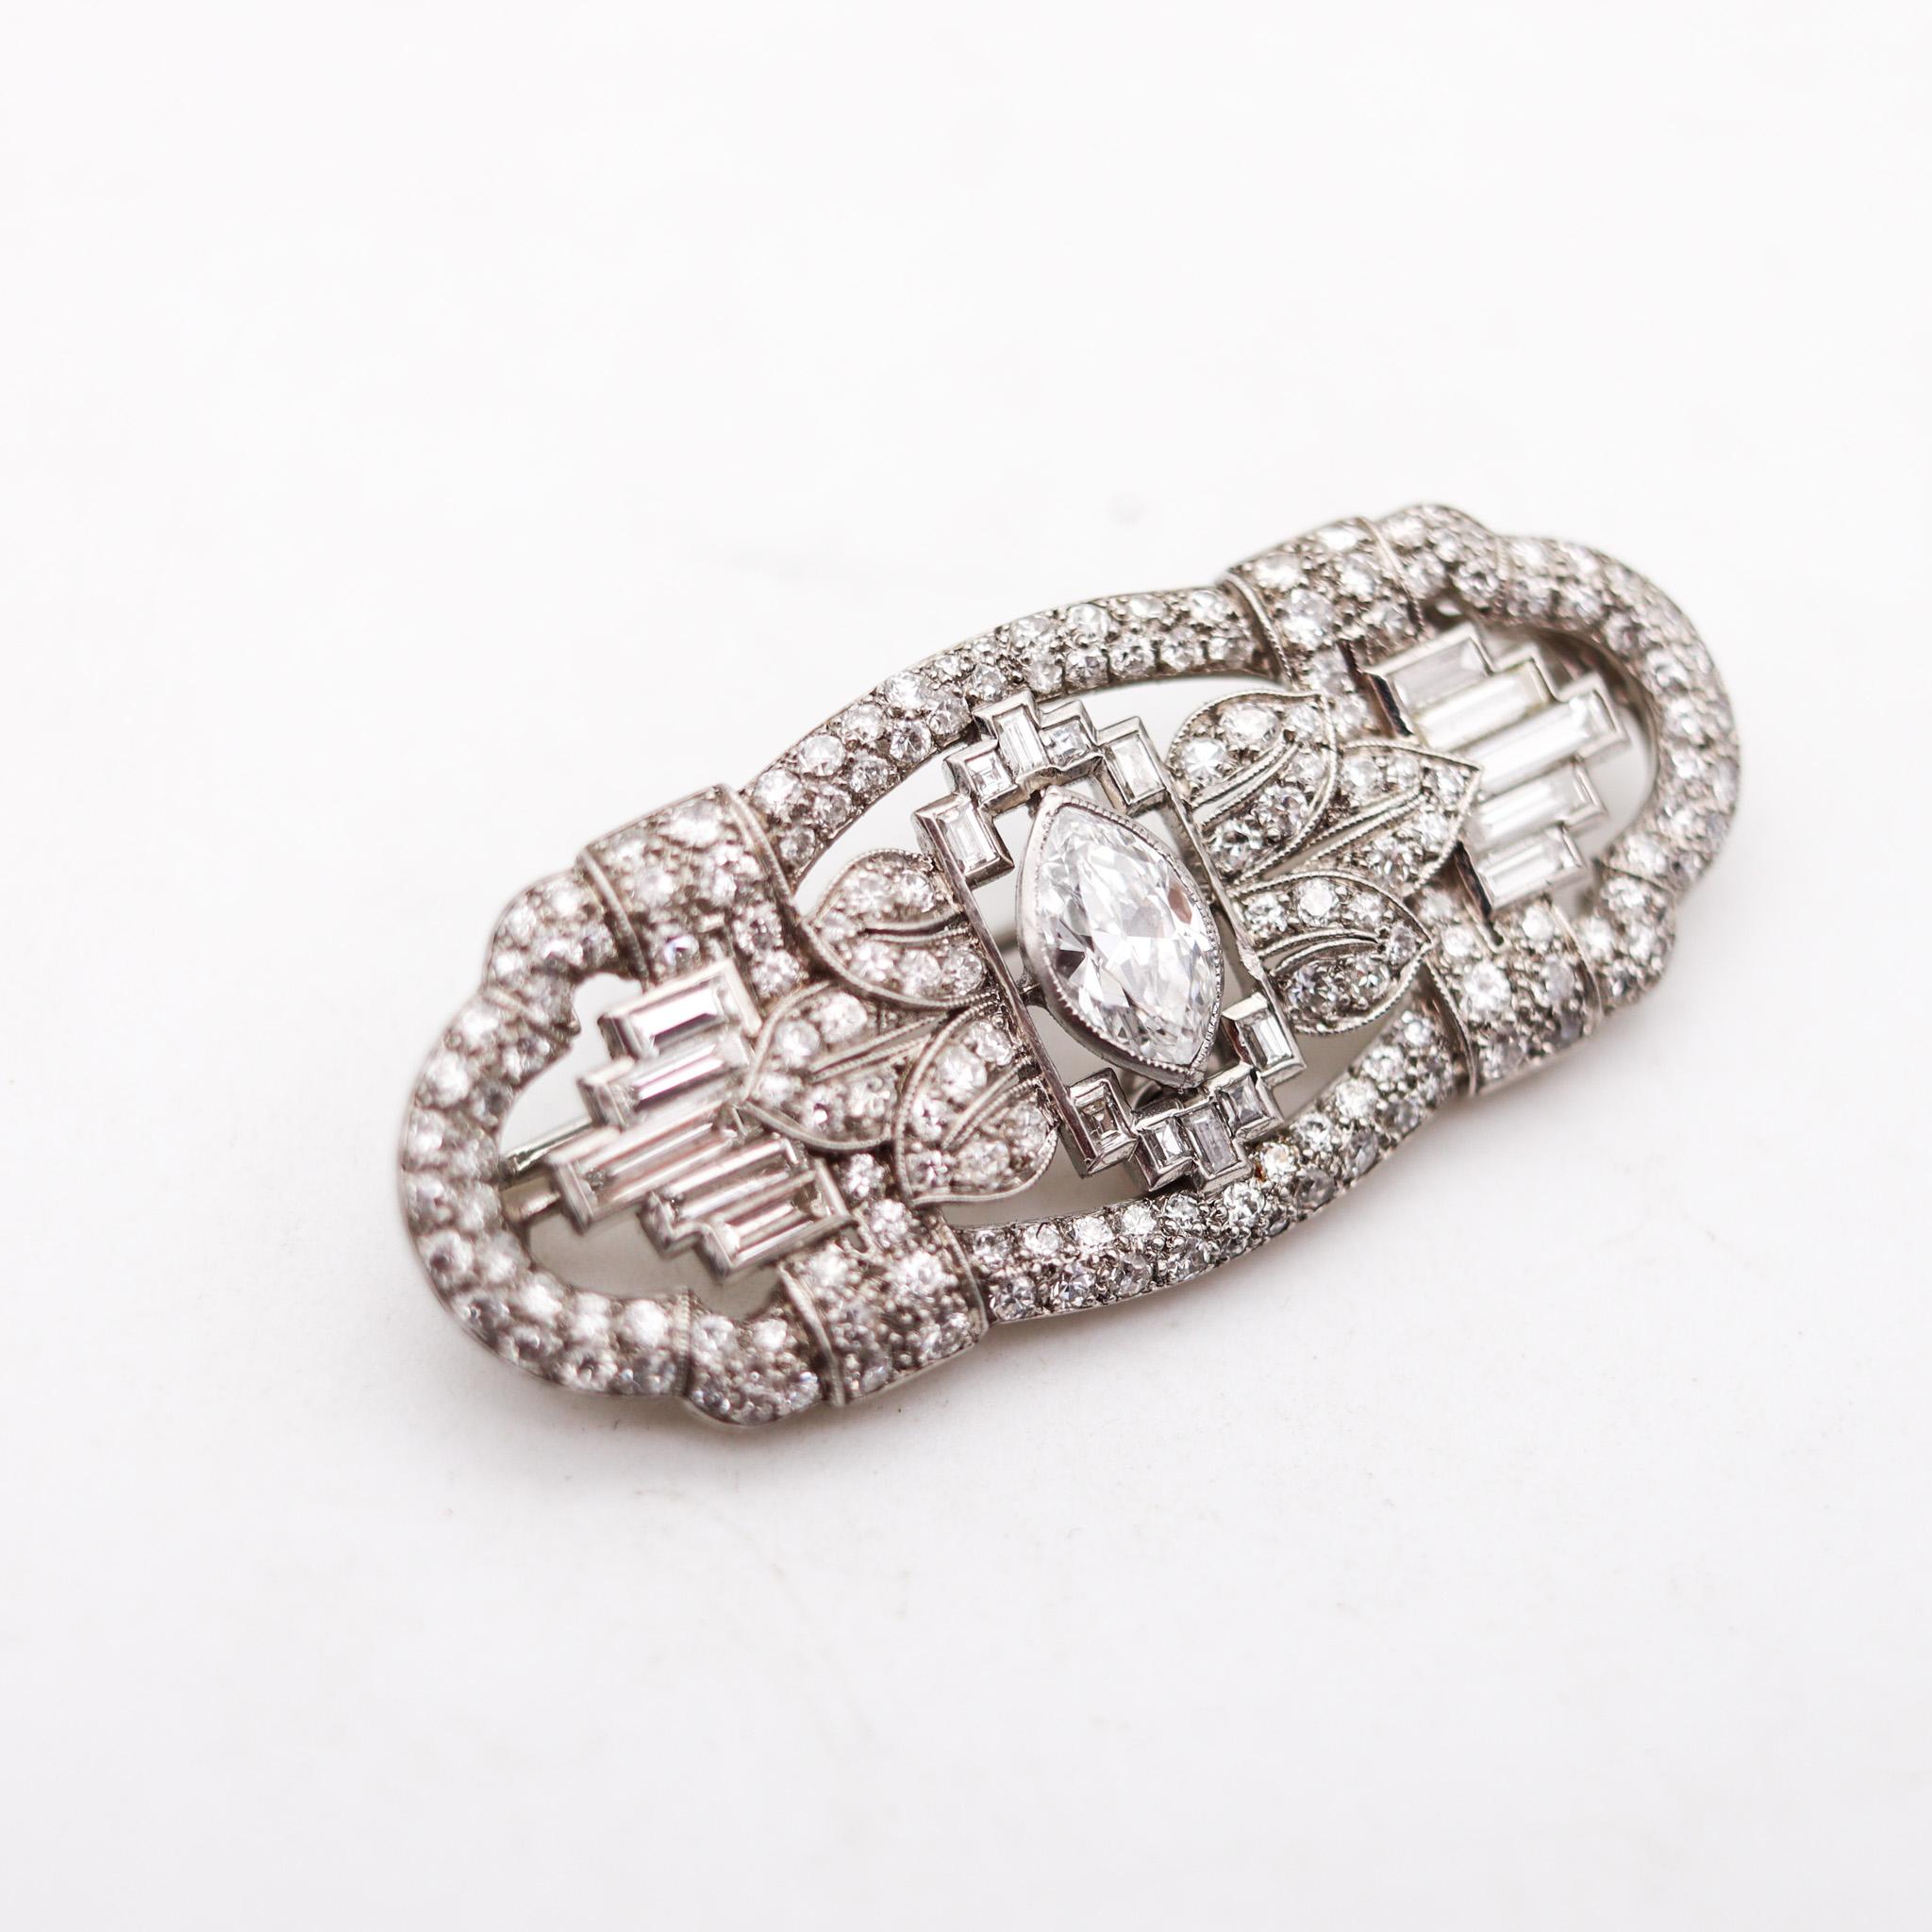 Art Deco 1932 Convertible Pendant Brooch In Platinum With 3.97 Ctw In Diamonds For Sale 3